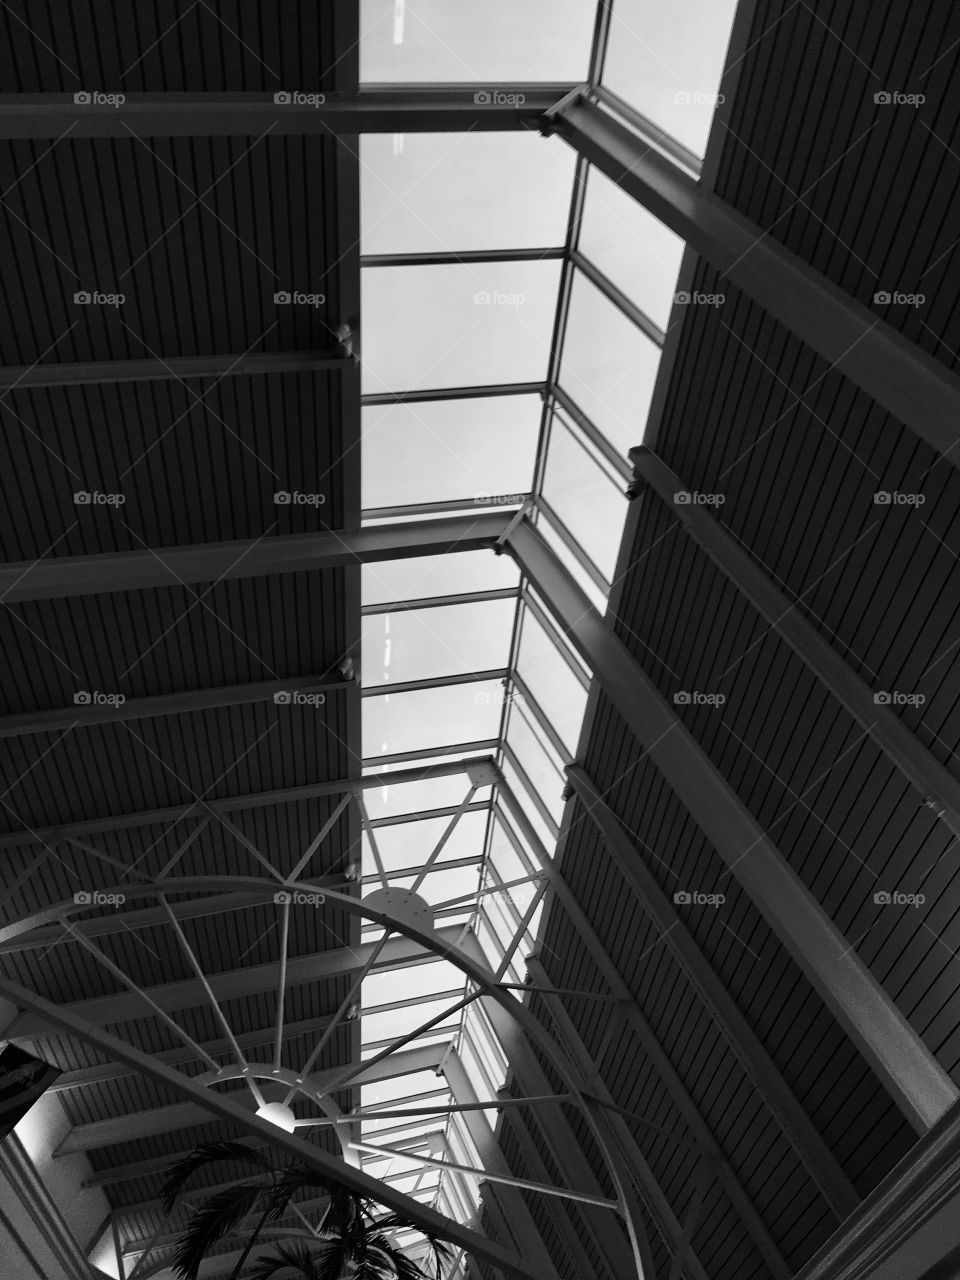 Awesome skylight at the mall 